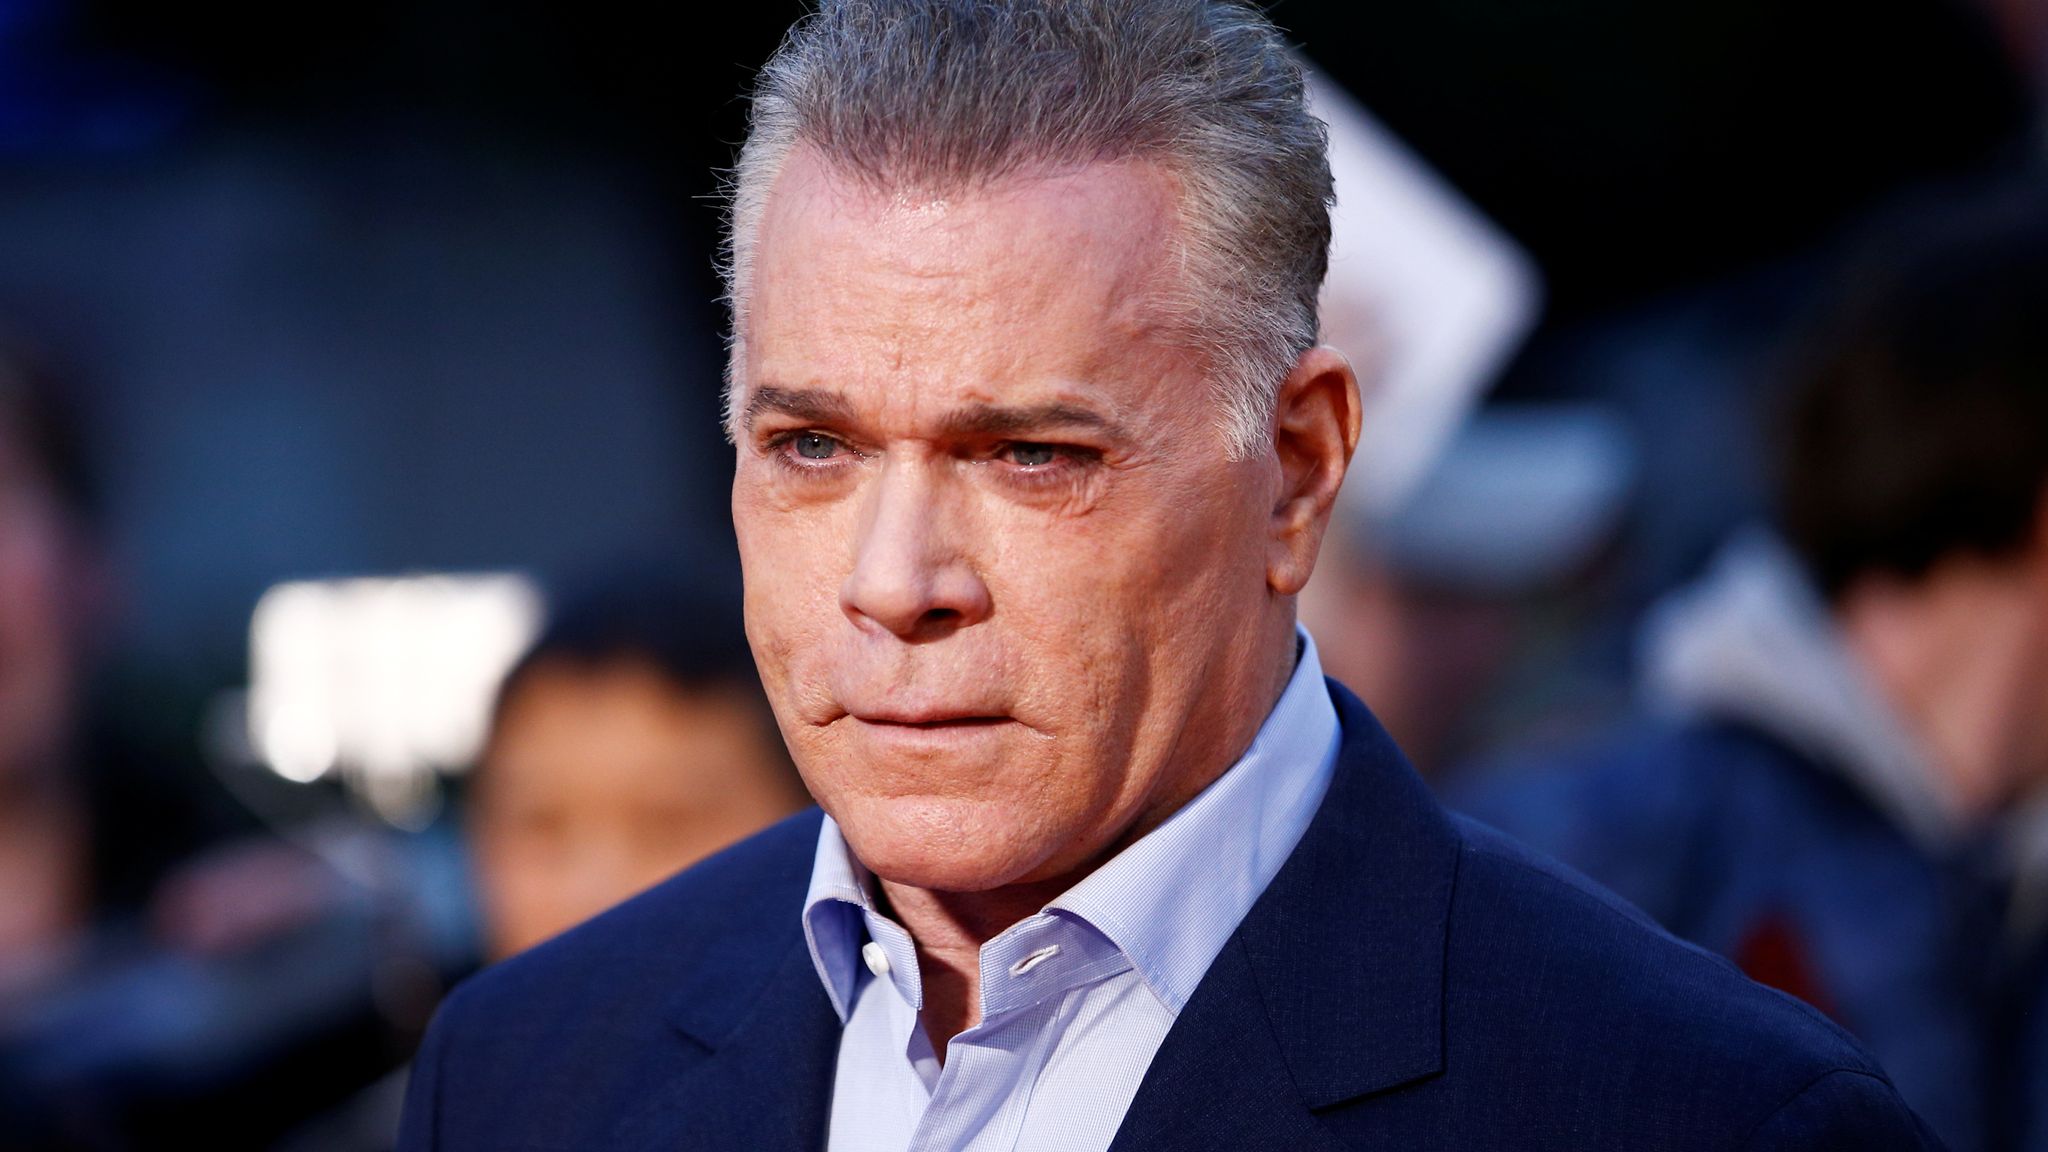 What disease does ray liotta have (Raymond Liotta, the Goodfellas star)